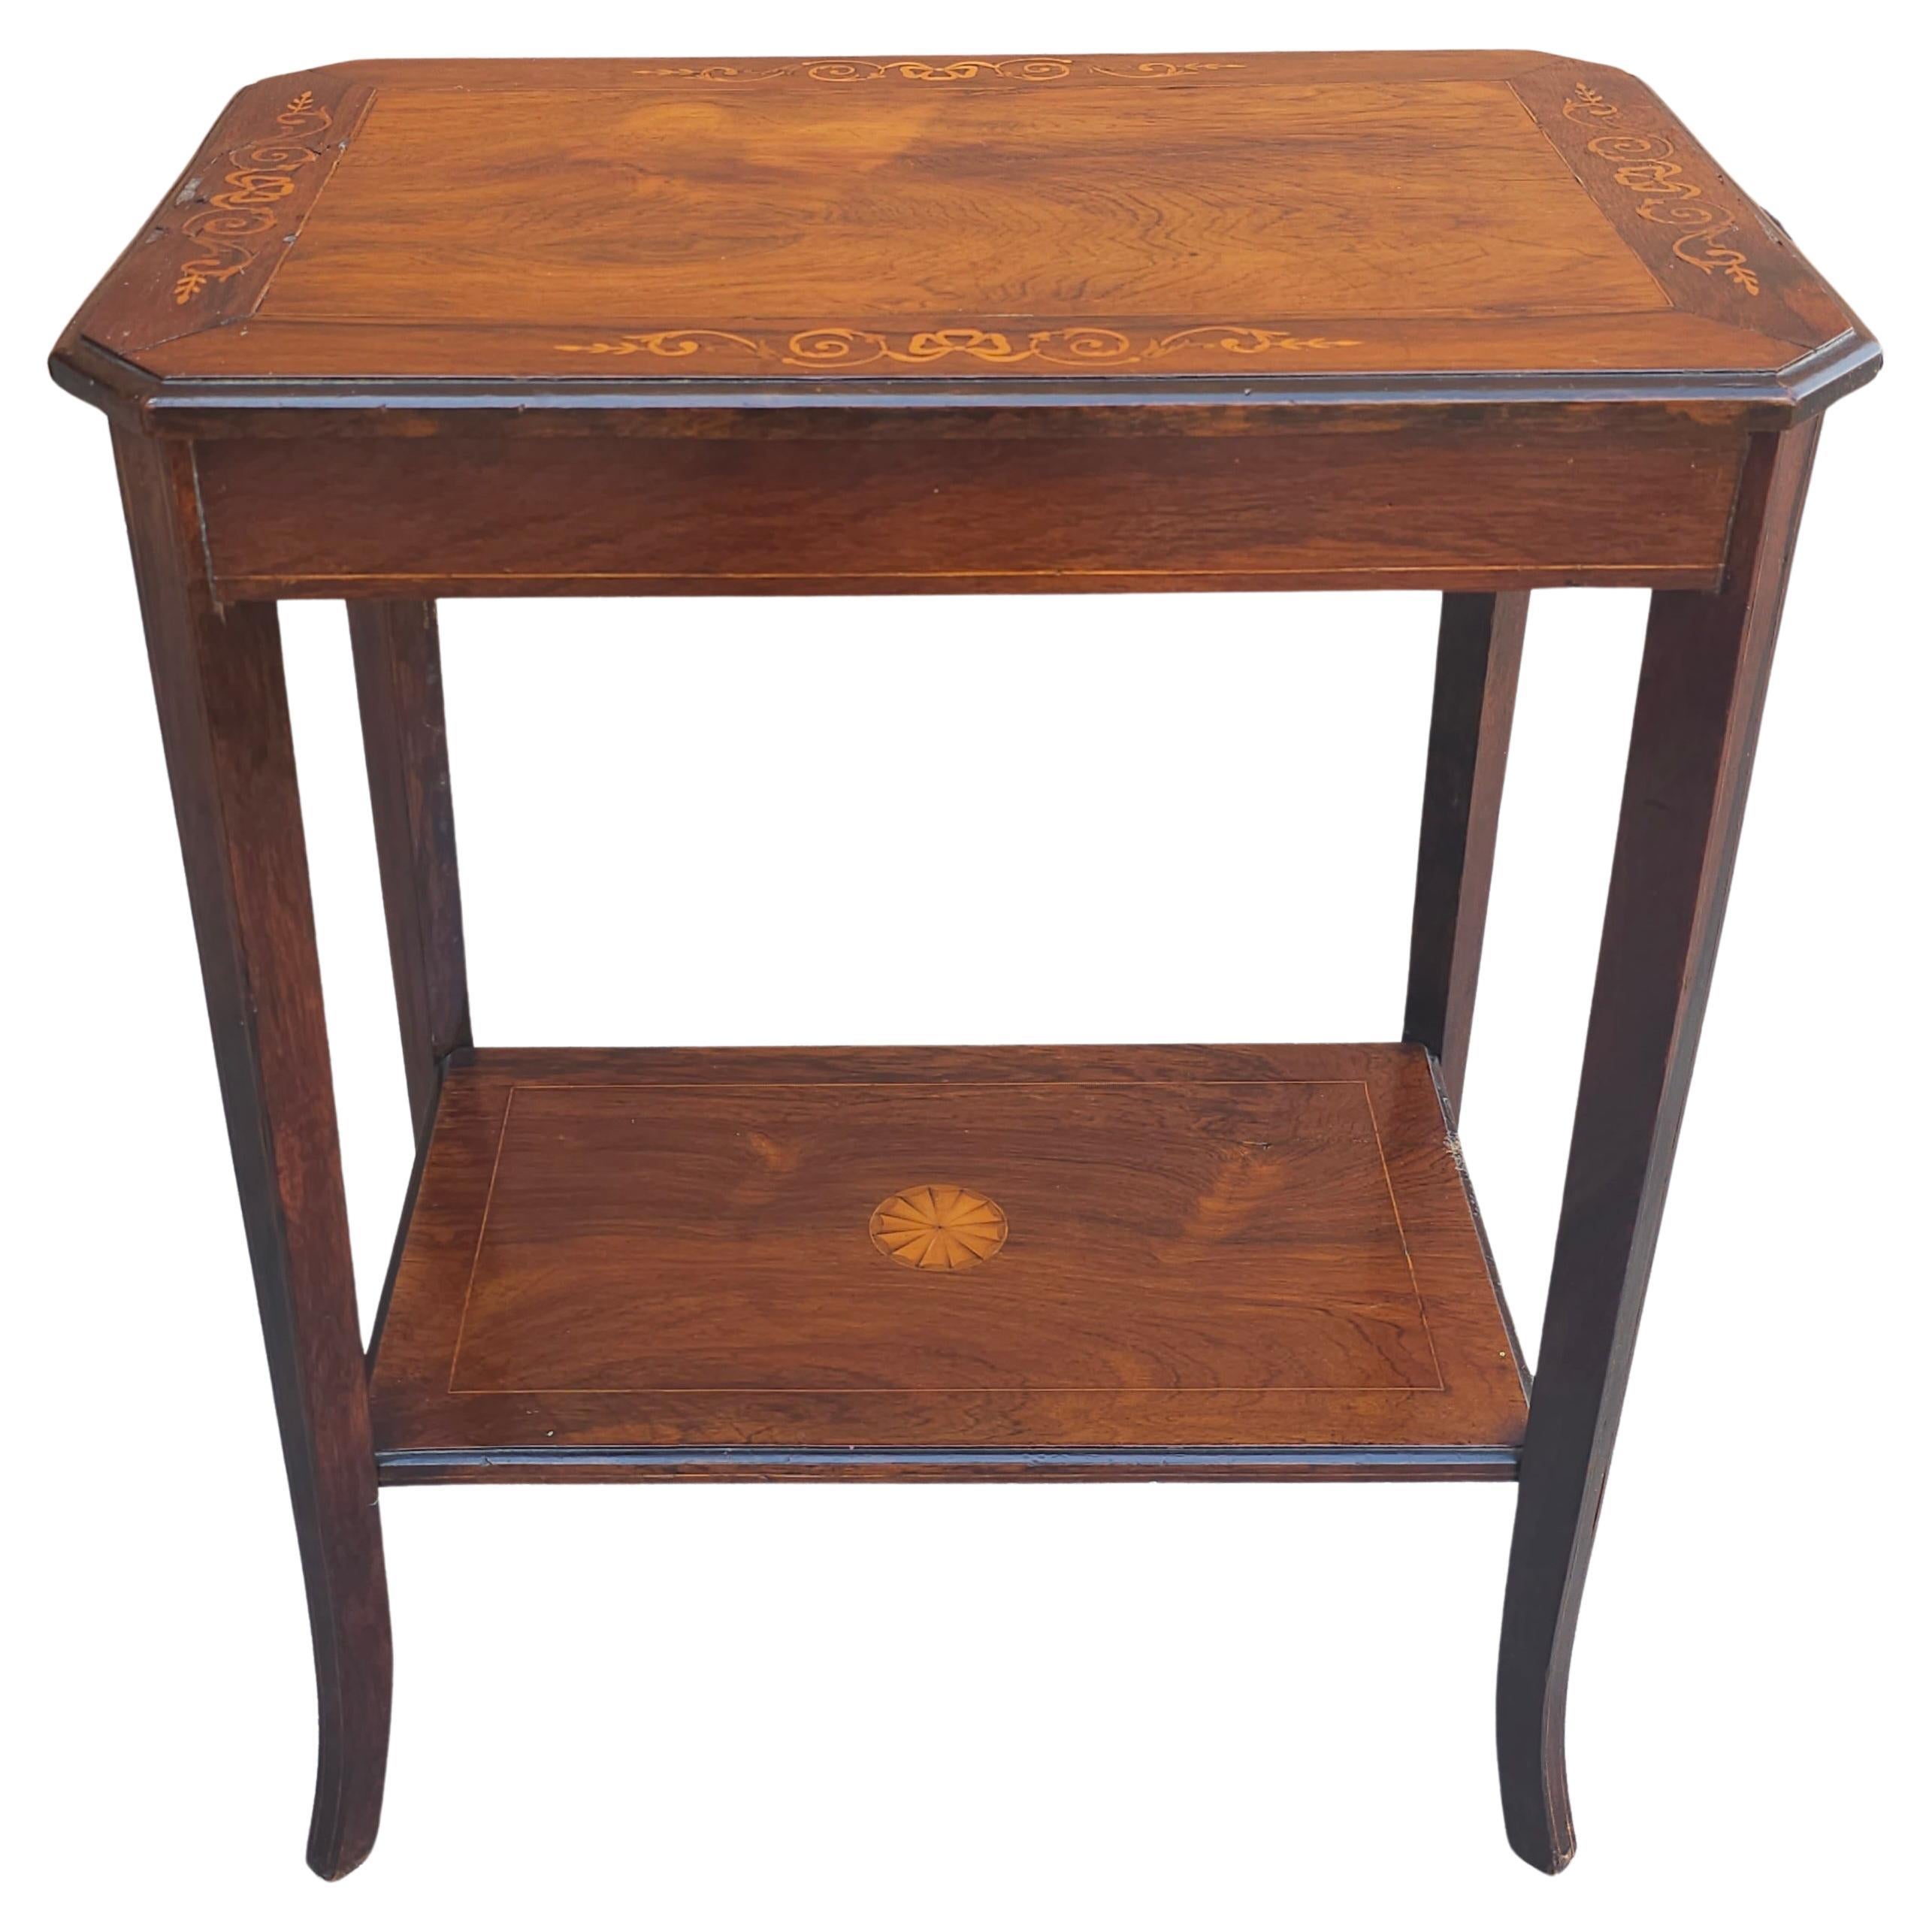 Early 20th C. Edwardian Rosewood Marquetry Inlaid  Side Table For Sale